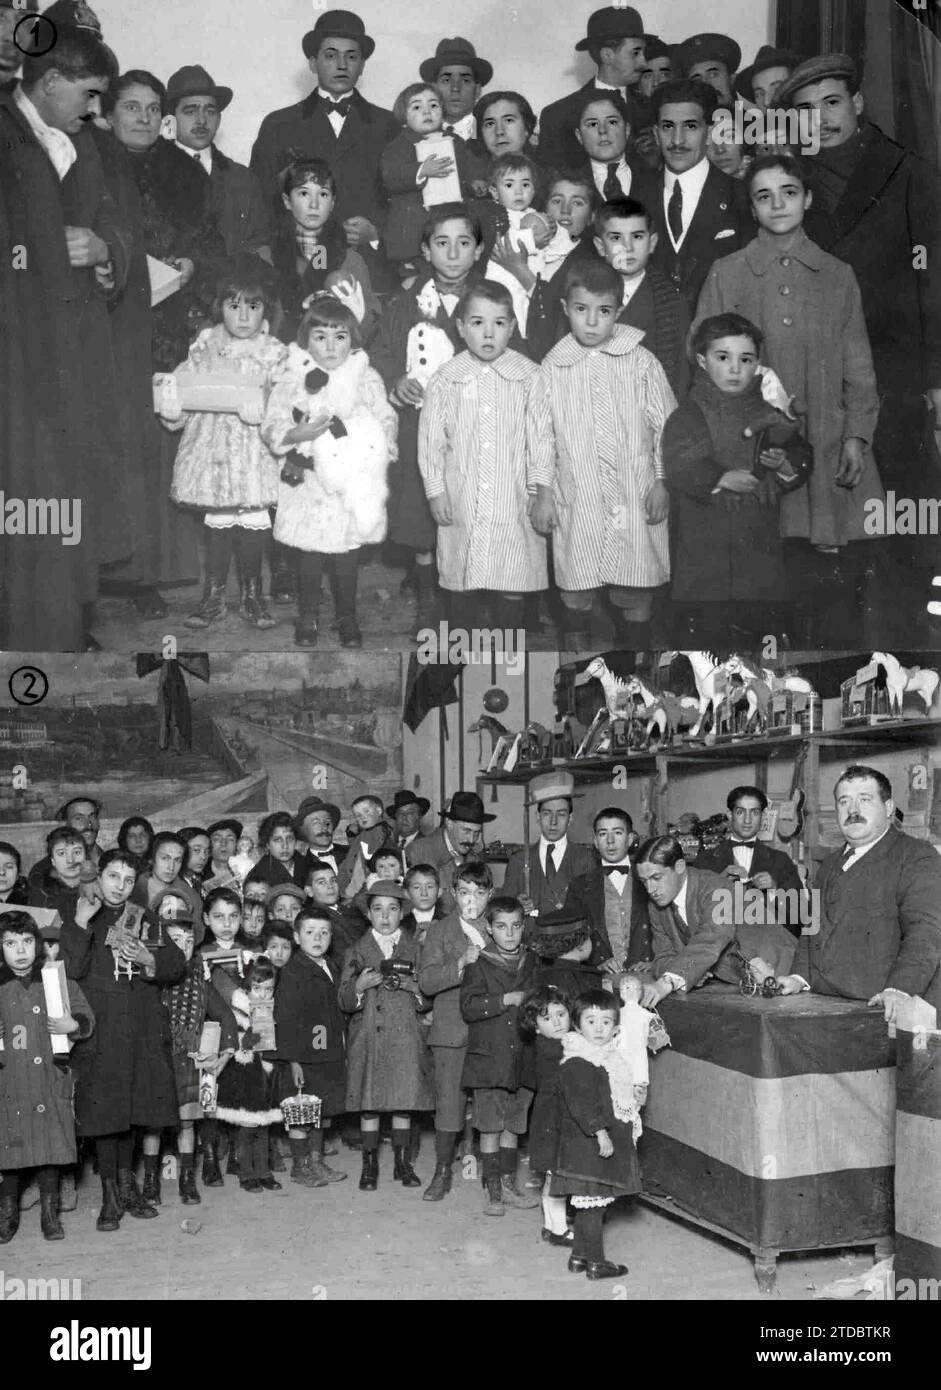 01/05/1918. The festival of the Three Wise Men in Madrid. 1.-group of attendees at the distribution of toys carried out by the Maurist youth in Romea. 2.-distribution of toys at the Hijos de Madrid center. Credit: Album / Archivo ABC / Ramón Alba,Julio Duque Stock Photo